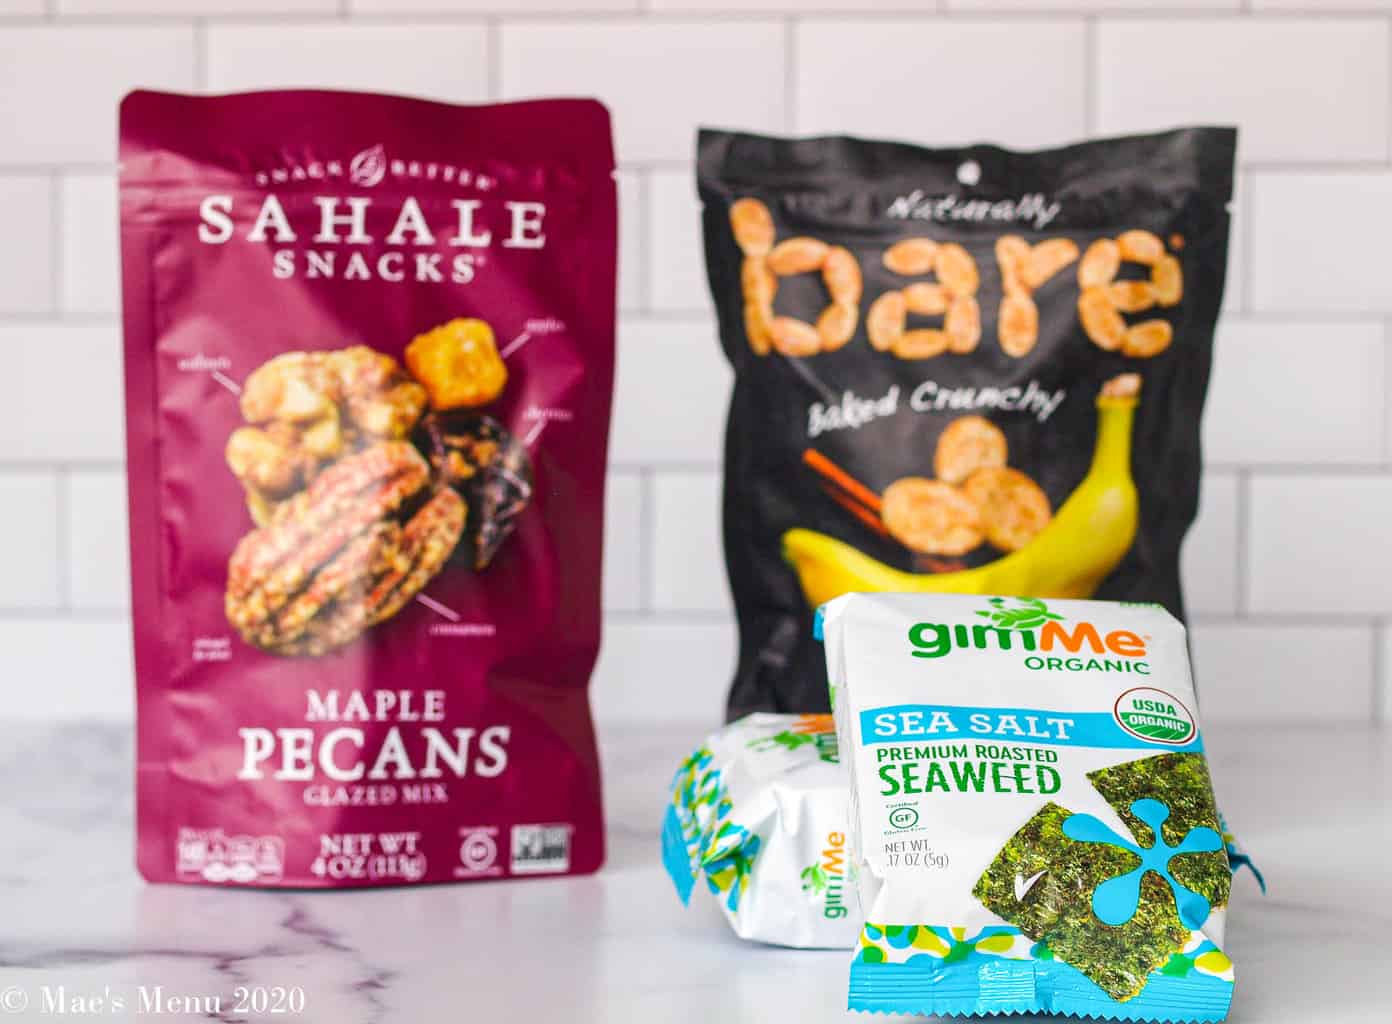 Snacks from thrive market on the counter: a bag of Sahale snacks, bare baked crunchy apples and 2 small containers of seaweed